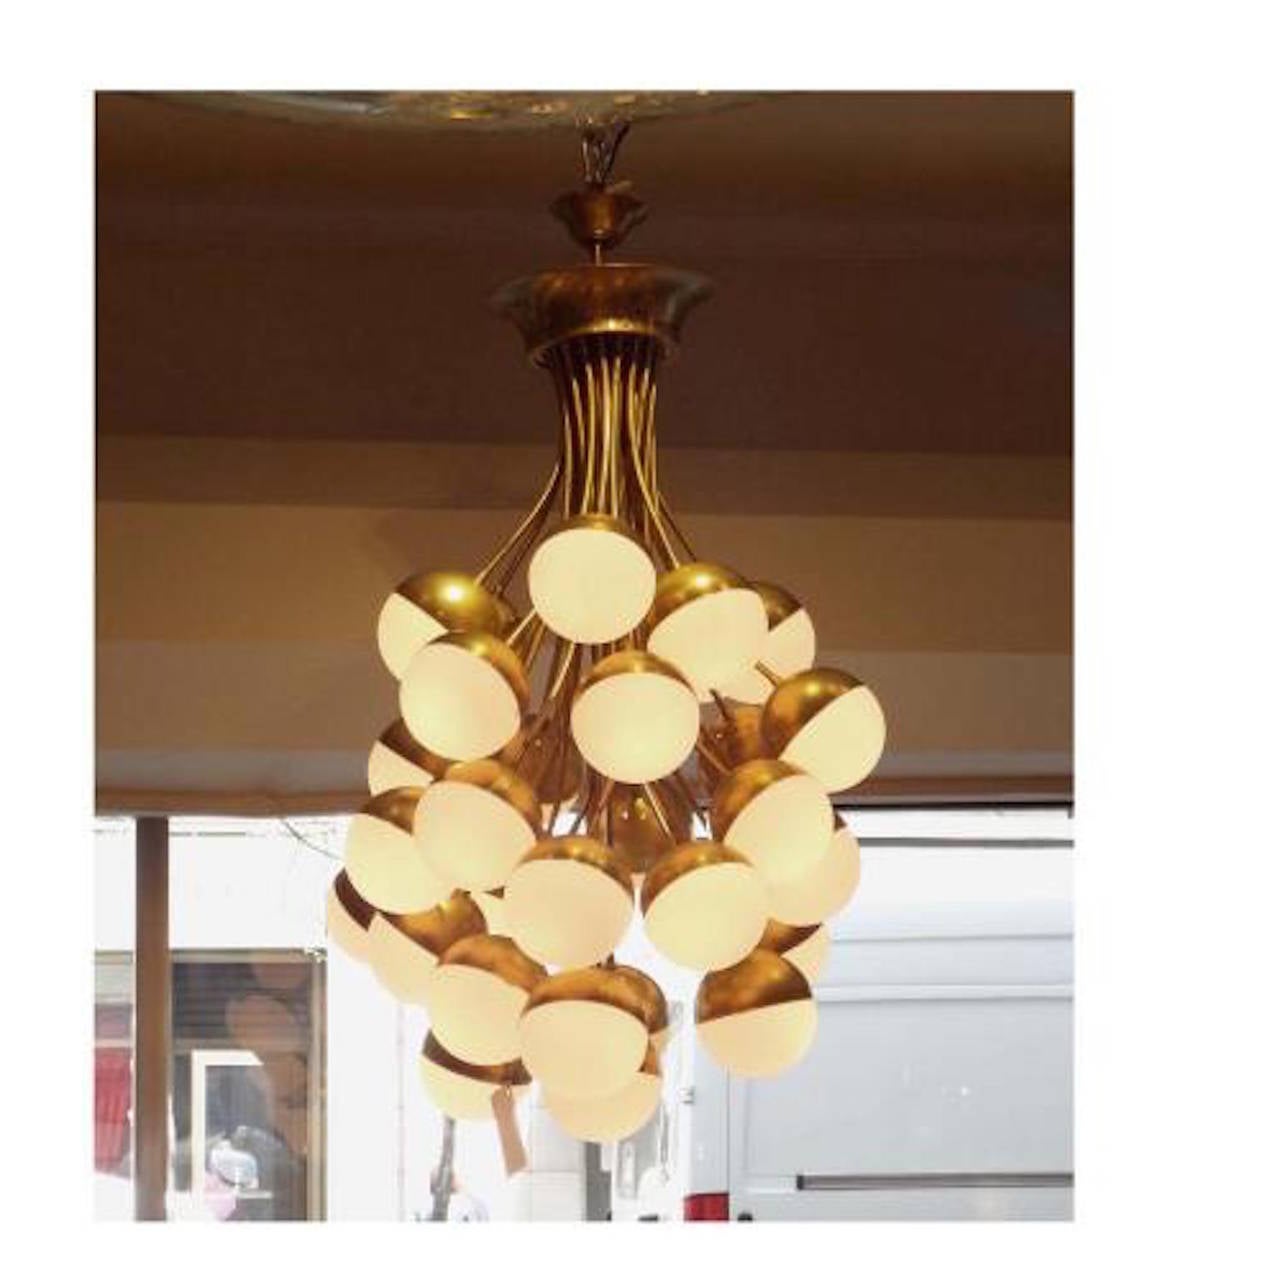 Rare, Grand Scale, 30-Light Mid Century Chandelier by Stilnovo In Excellent Condition For Sale In New York, NY